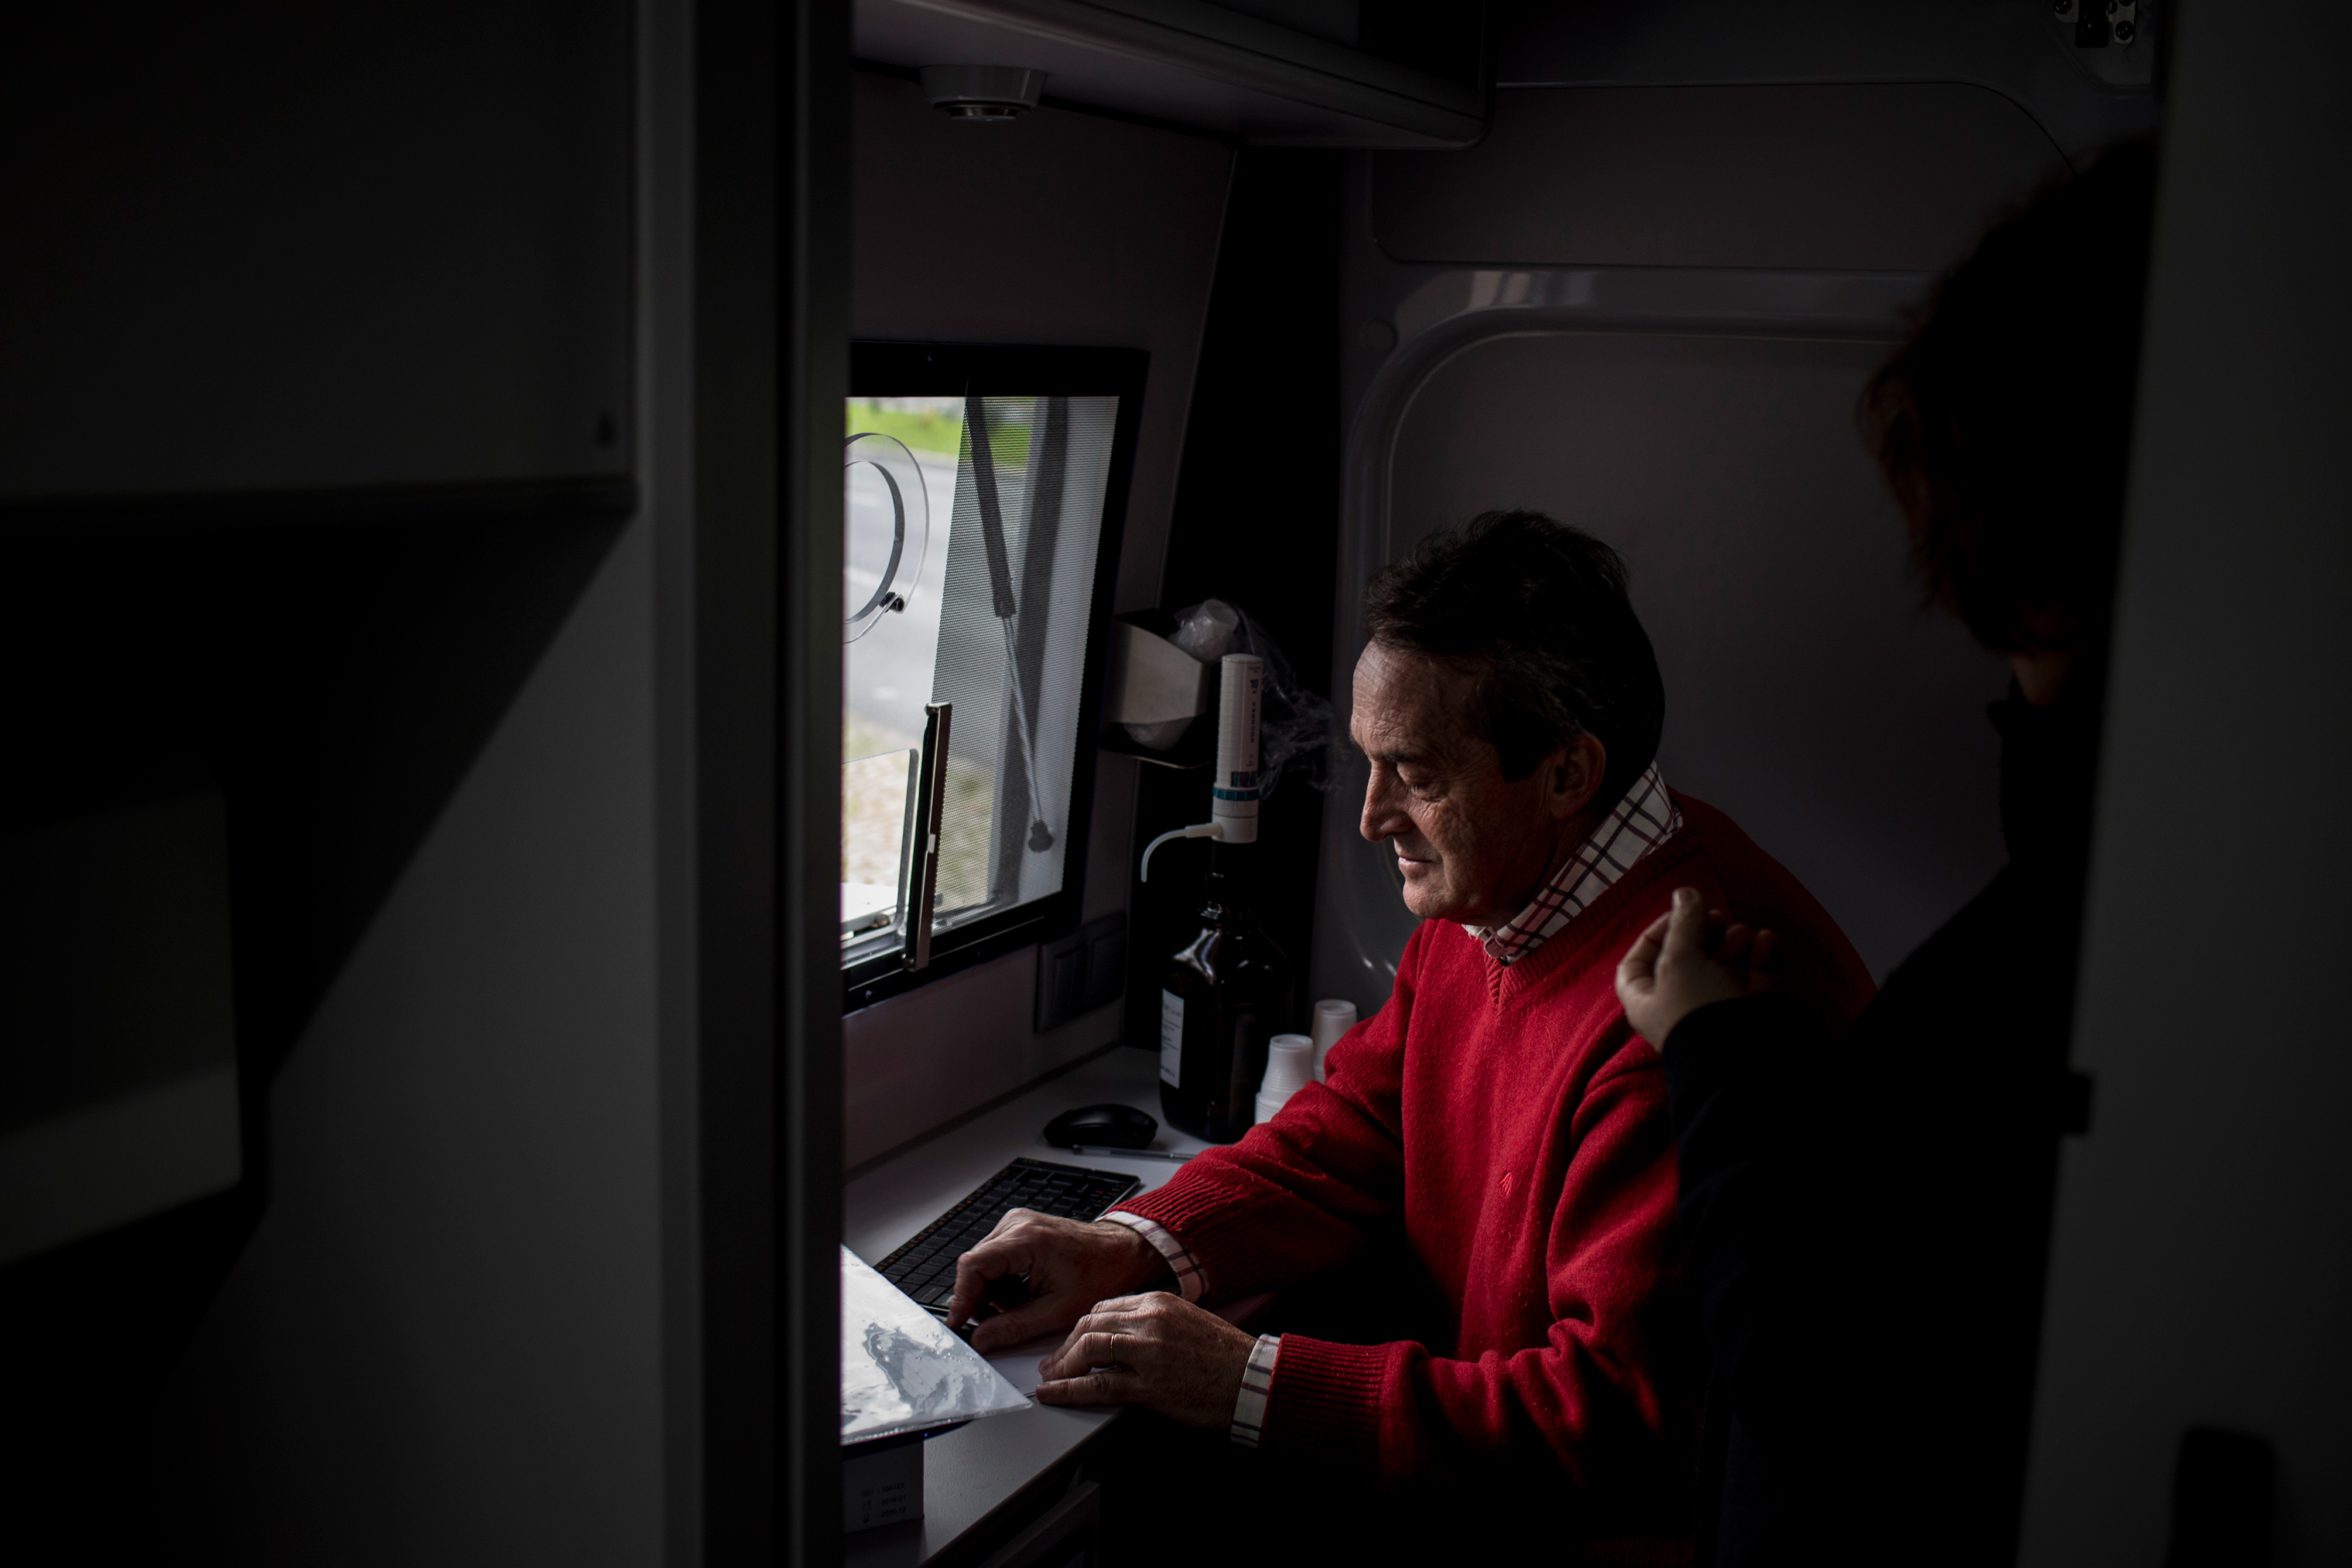 João, a 60-year old nurse, searches for a patient’s doses at a state sponsored mobile methadone clinic in Lisbon, February 9, 2017. It is operated by the Ares do Pinhal Association, and has existed since the Casal Ventoso neighborhood was demolished. The two vans administer methadone maintenance therapy to more than 1,200 people every day. Opioid users who receive this treatment on the street are healthier and safer than those who do not. (Gonçalo Fonseca)